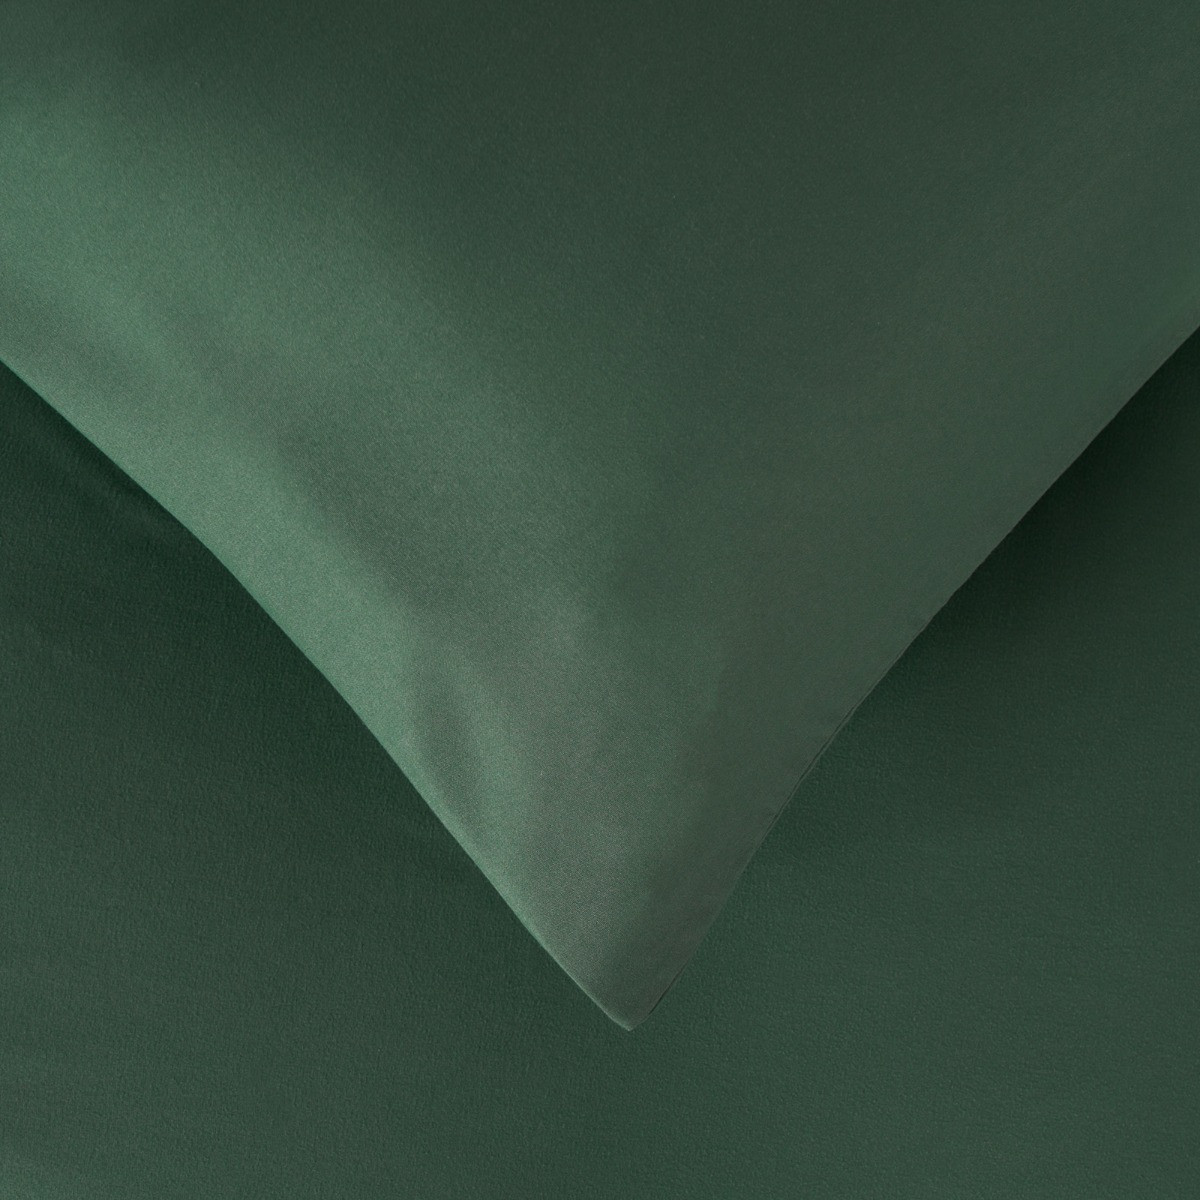 Brentfords 2 Pack Plain Dyed Housewife Pillowcases - Forest Green>